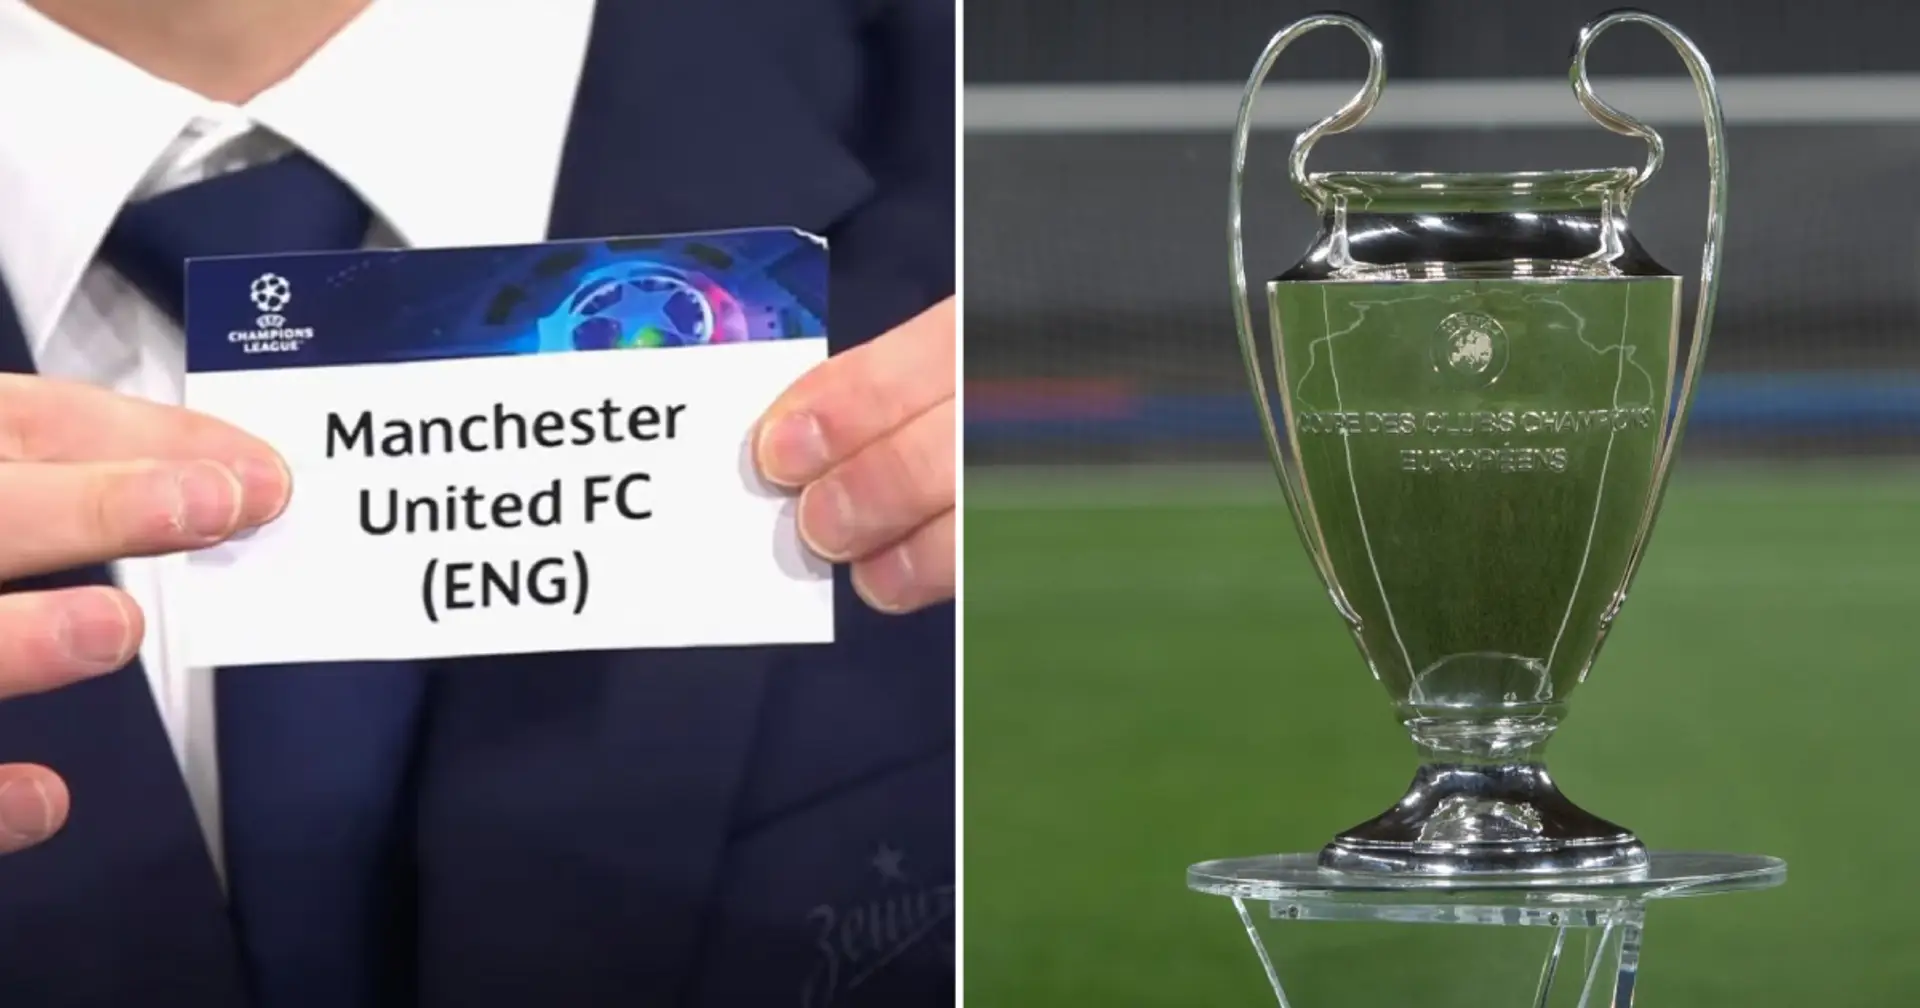 Man United to face Bayern, Copenhagen and Galatasaray in Champions League group